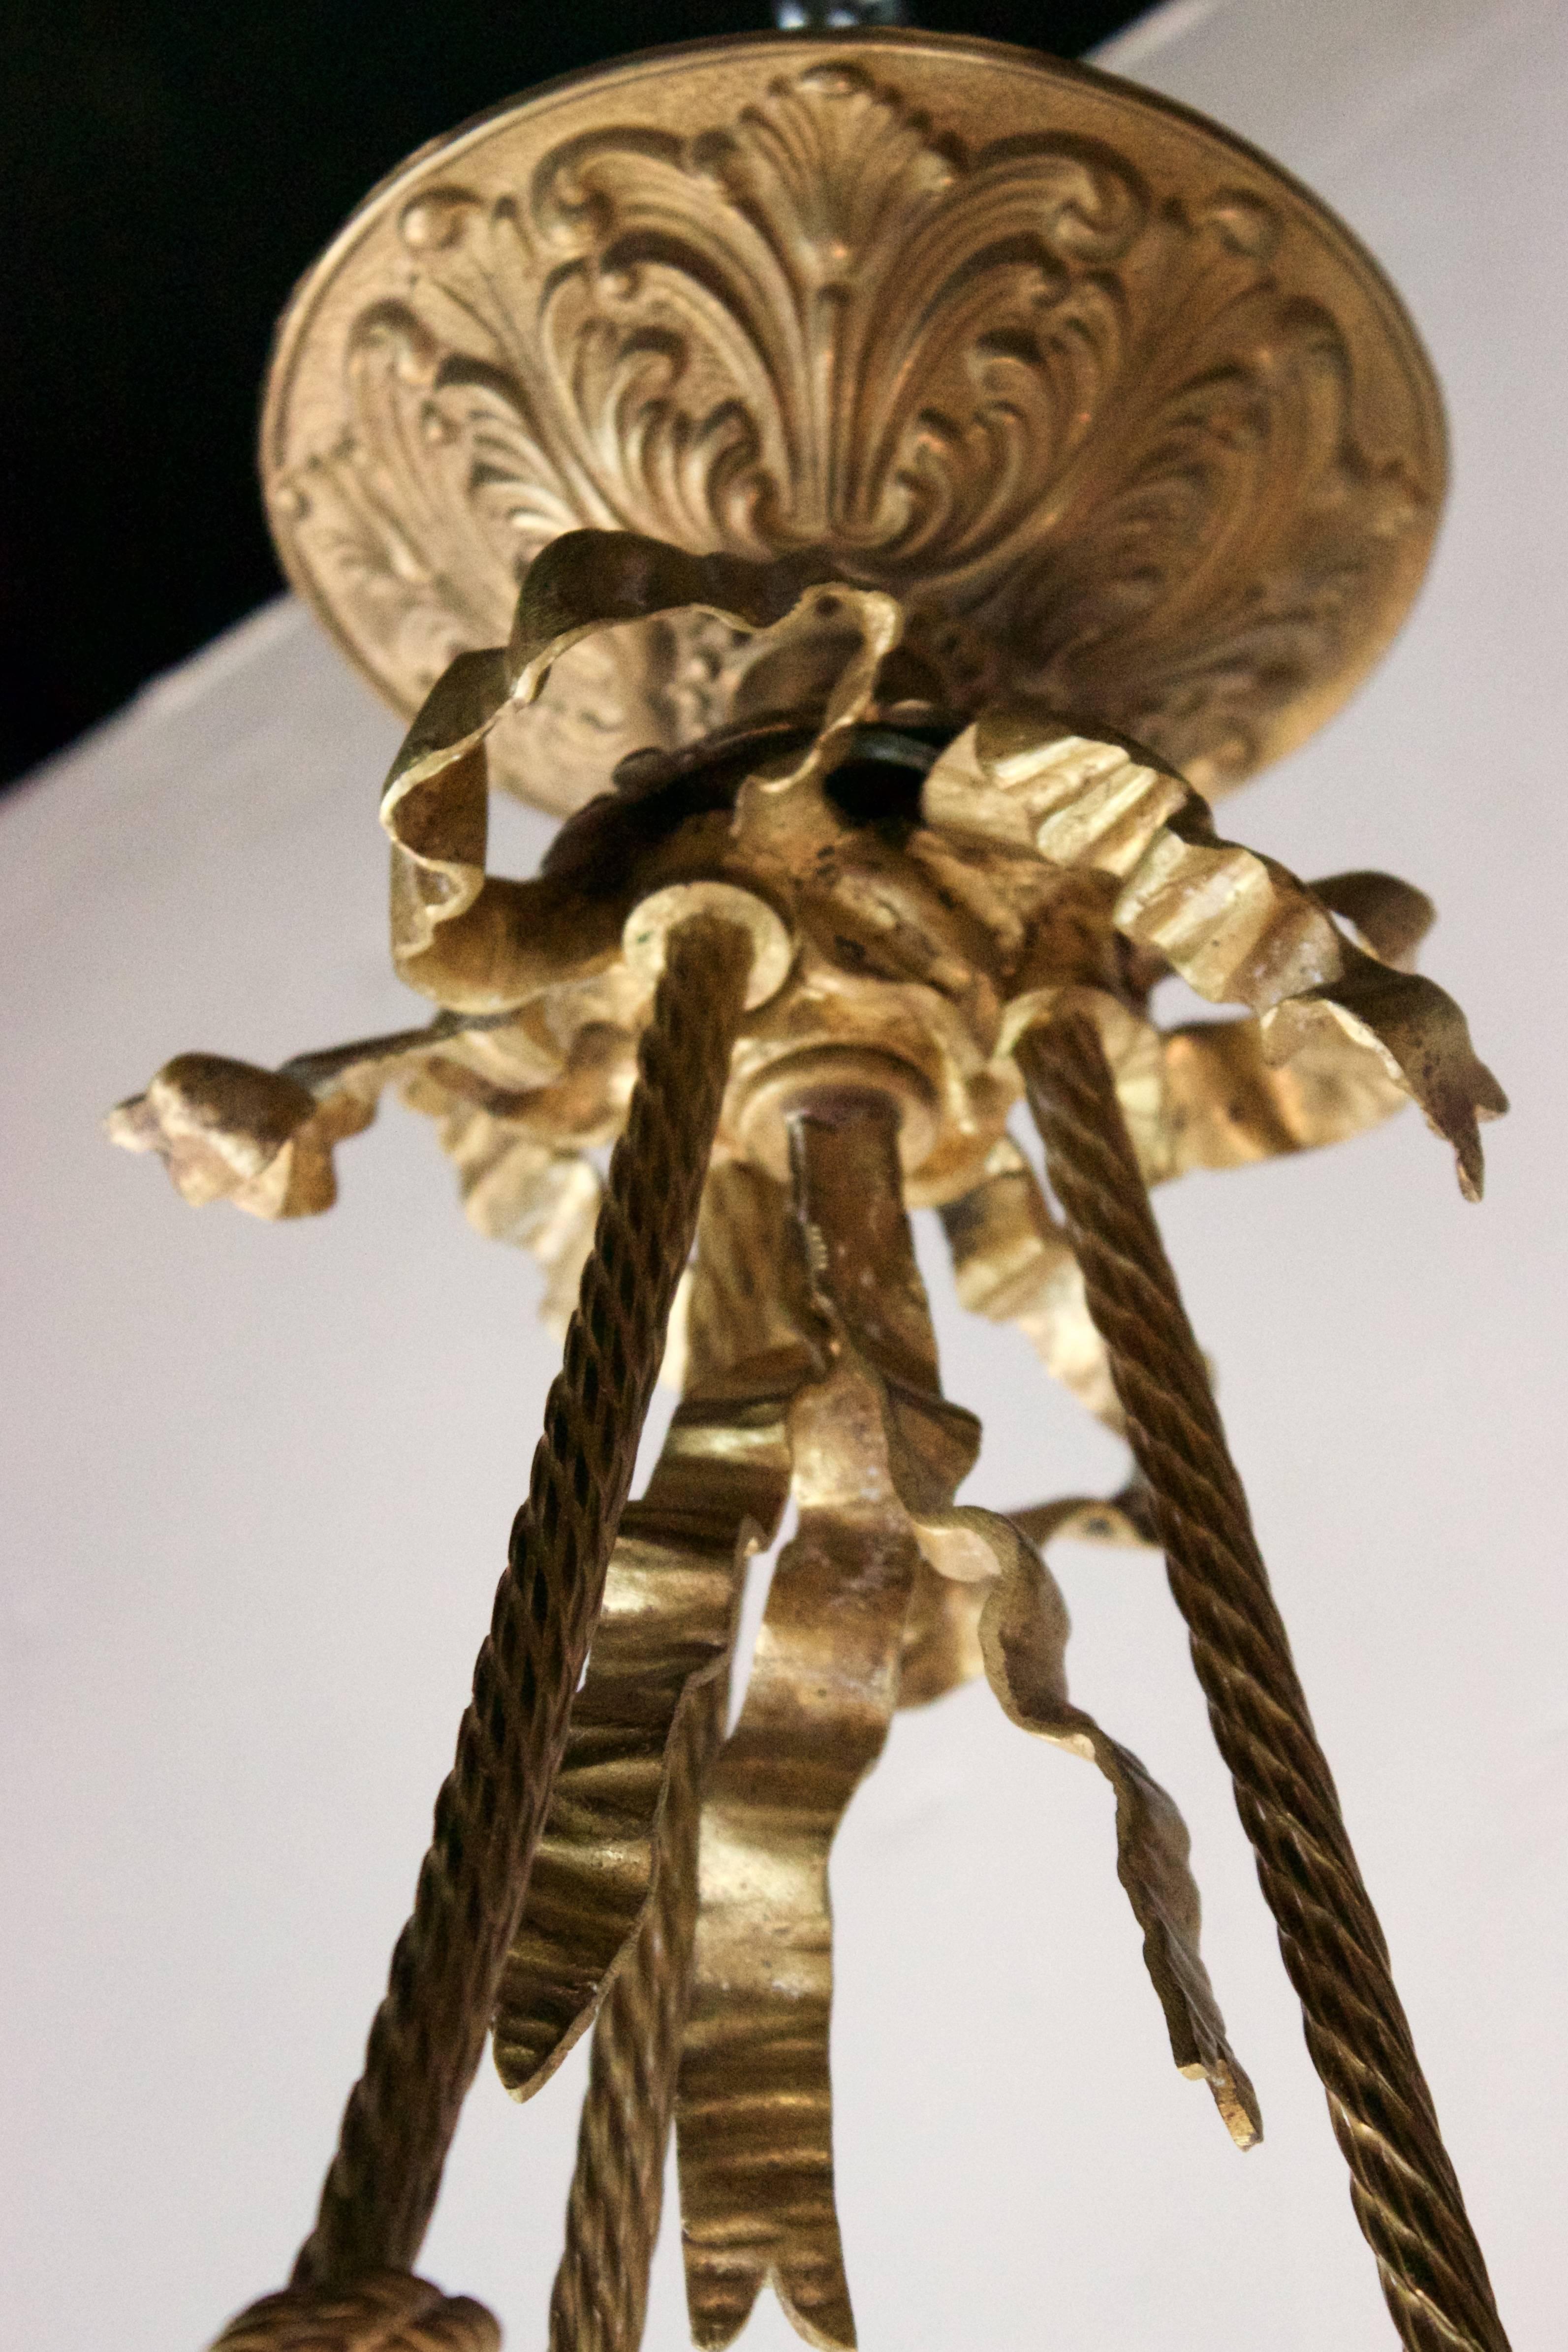 Rare Art Nouveau period pendant with three gilded bronze arms and four lights. Rose form glass shades for the three arms and a glass flambeau at top.